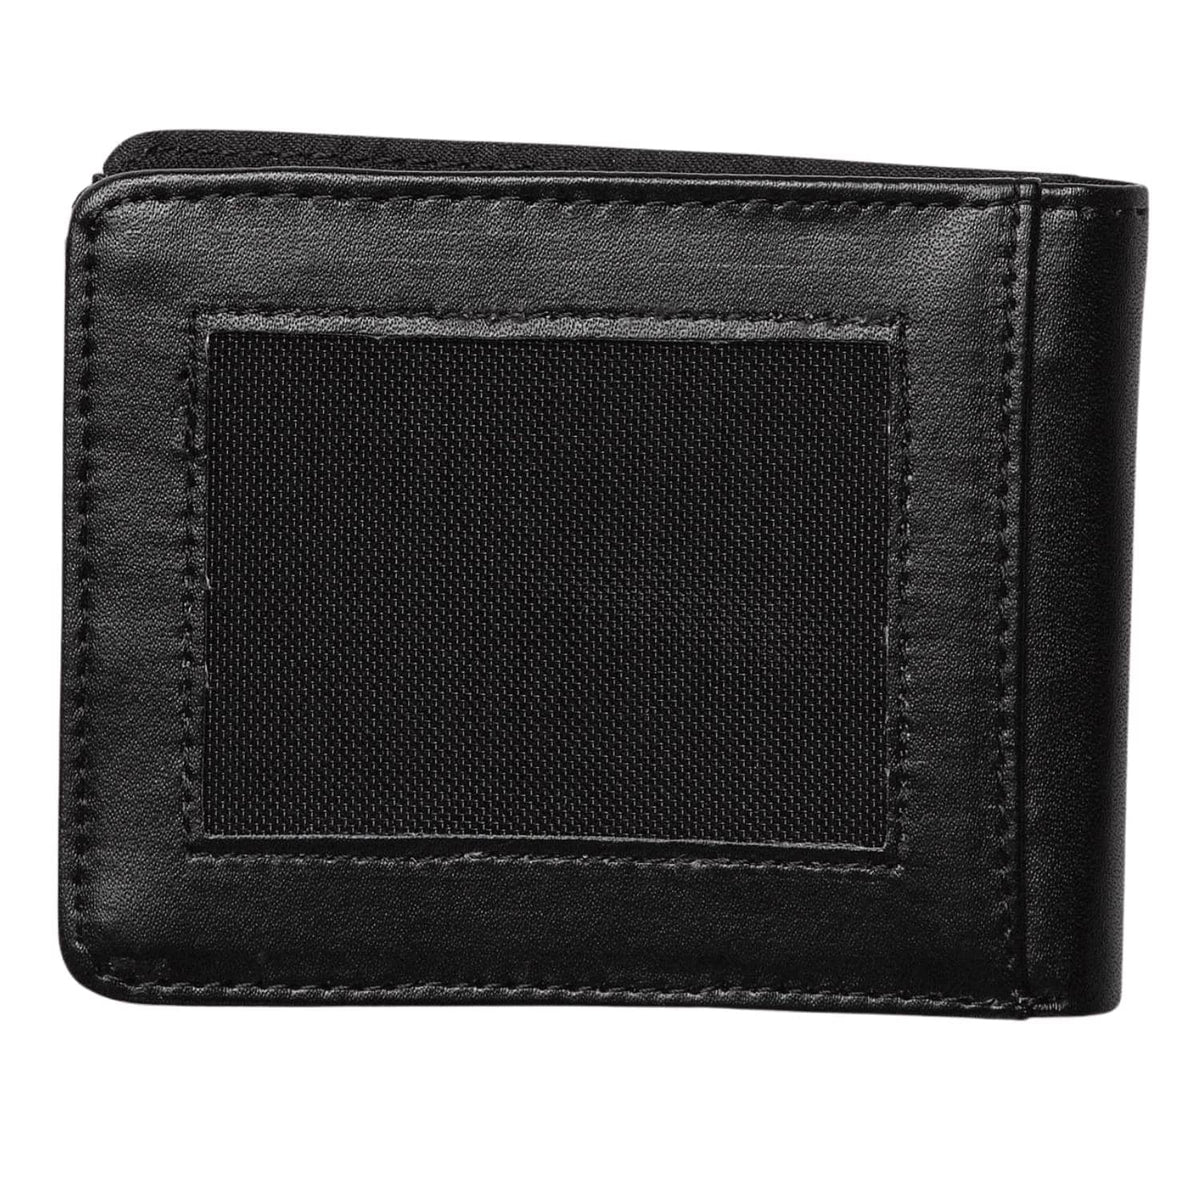 Volcom Corps PU Wallet - Black - One Size